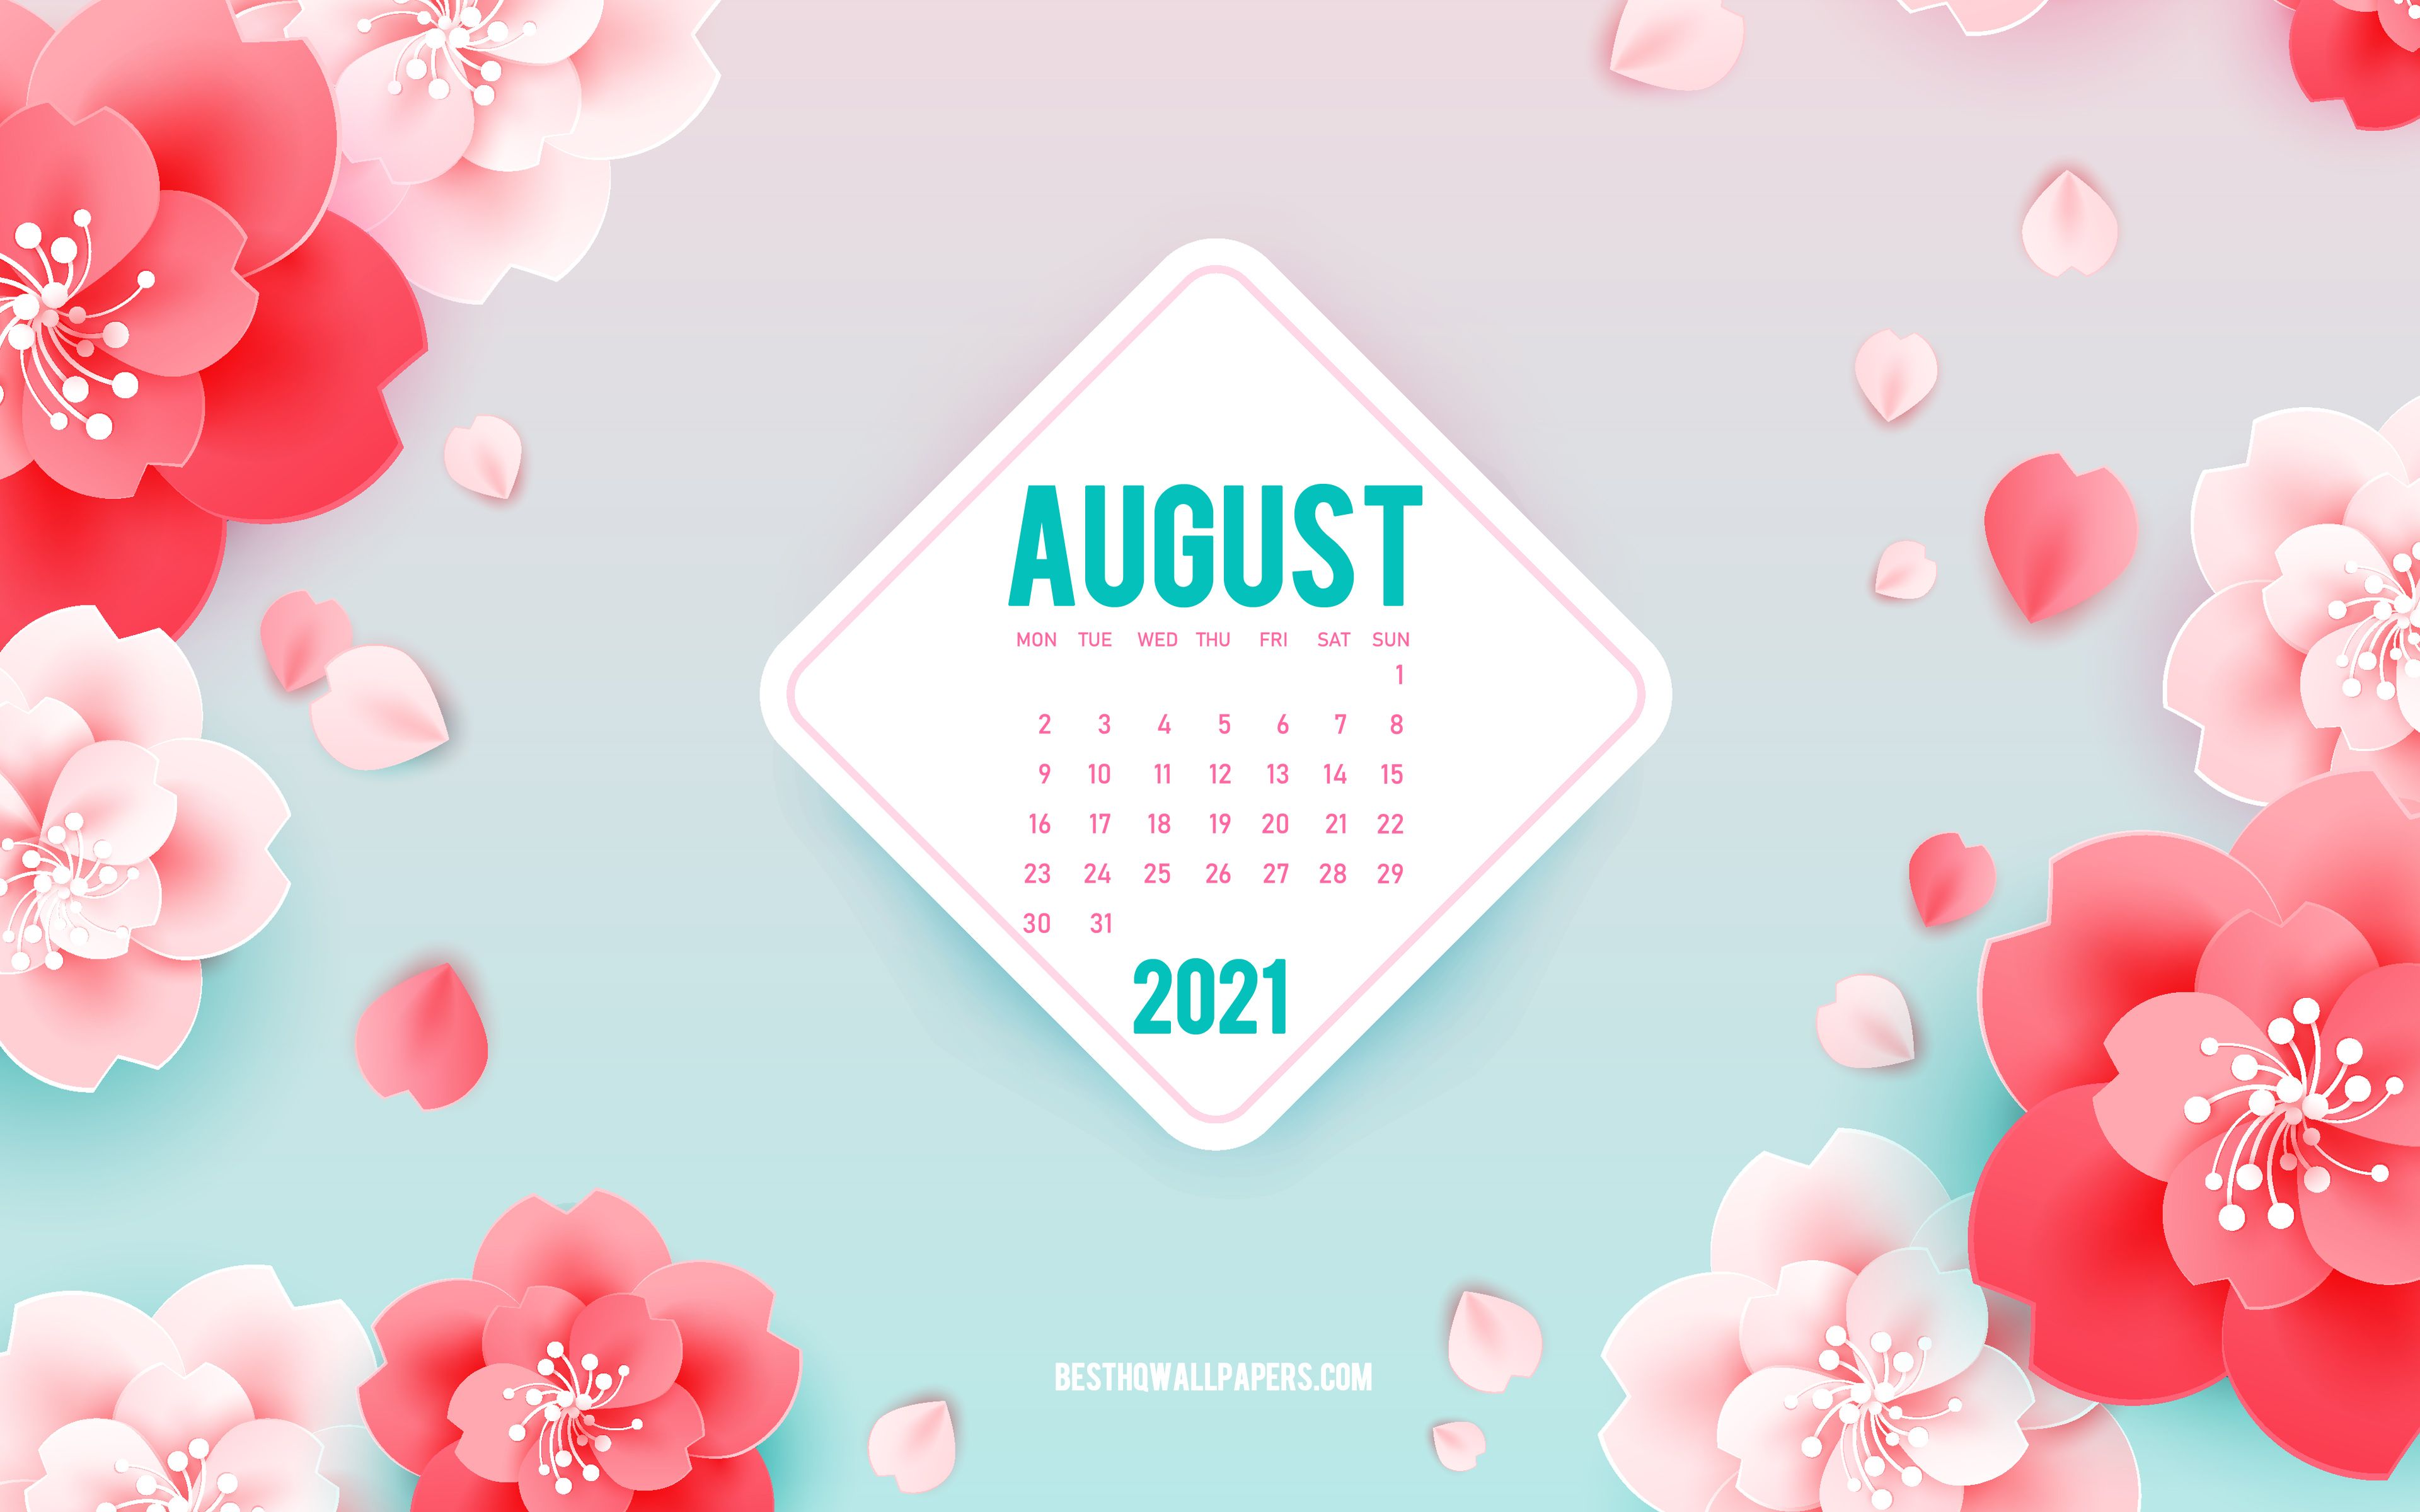 Download wallpapers 2021 August Calendar, 4k, pink flowers, spring art, August, 2021 summer calendars, summer backgrounds with flowers, August 2021 Calendar, paper flowers for desktop with resolution 3840x2400. High Quality HD pictures wallpapers